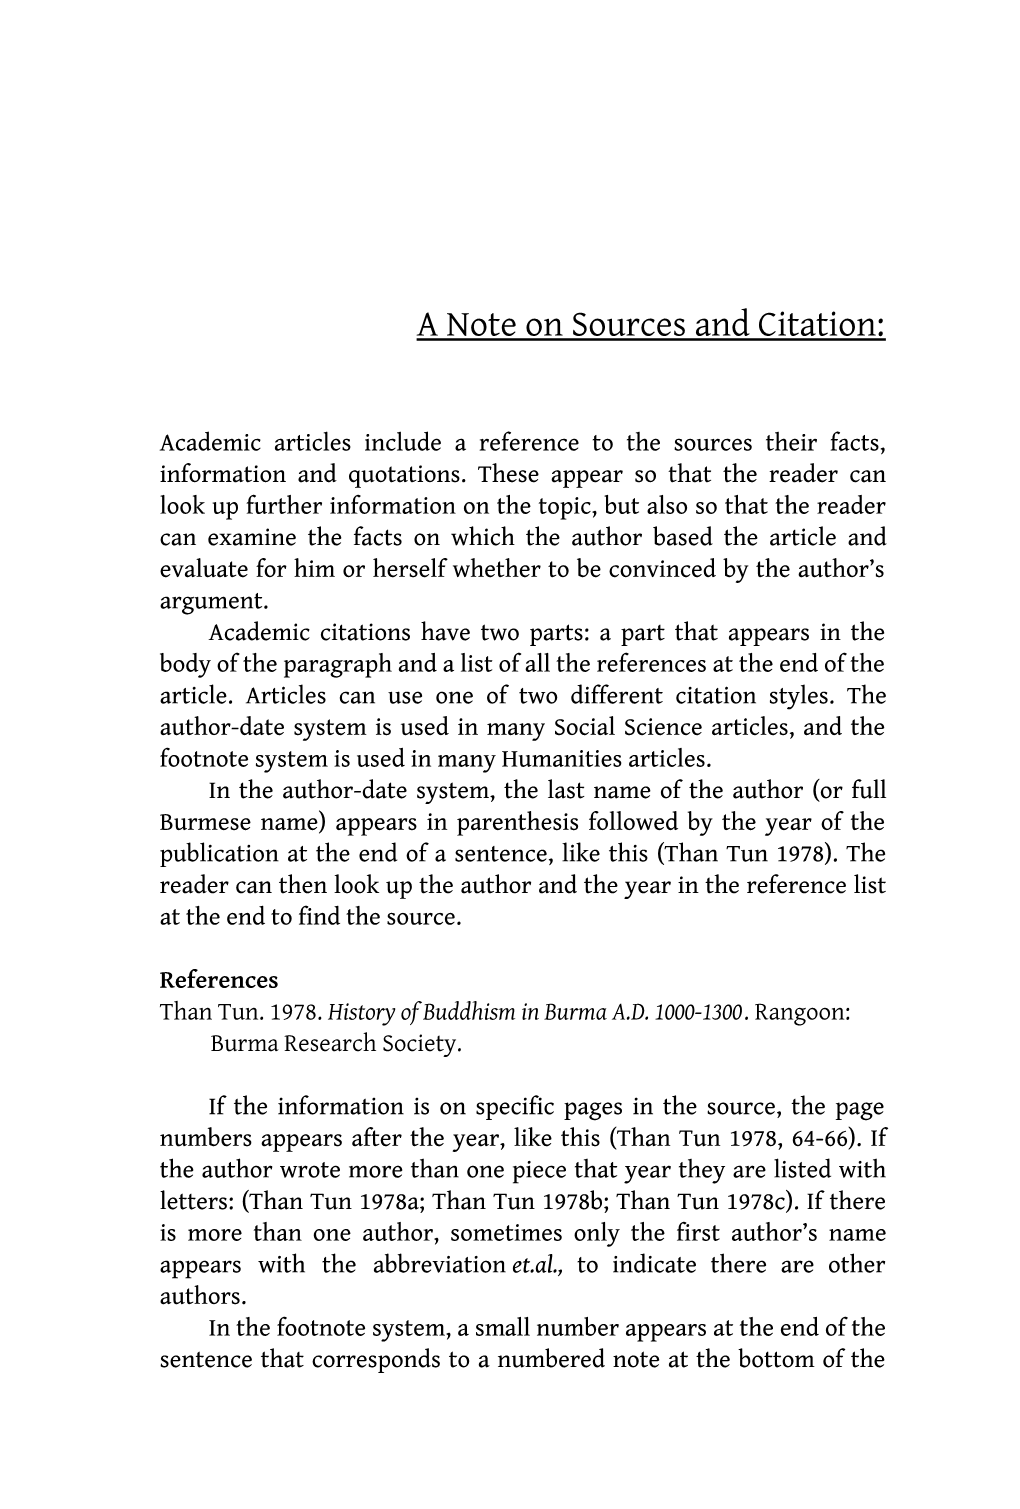 A Note on Sources and Citation